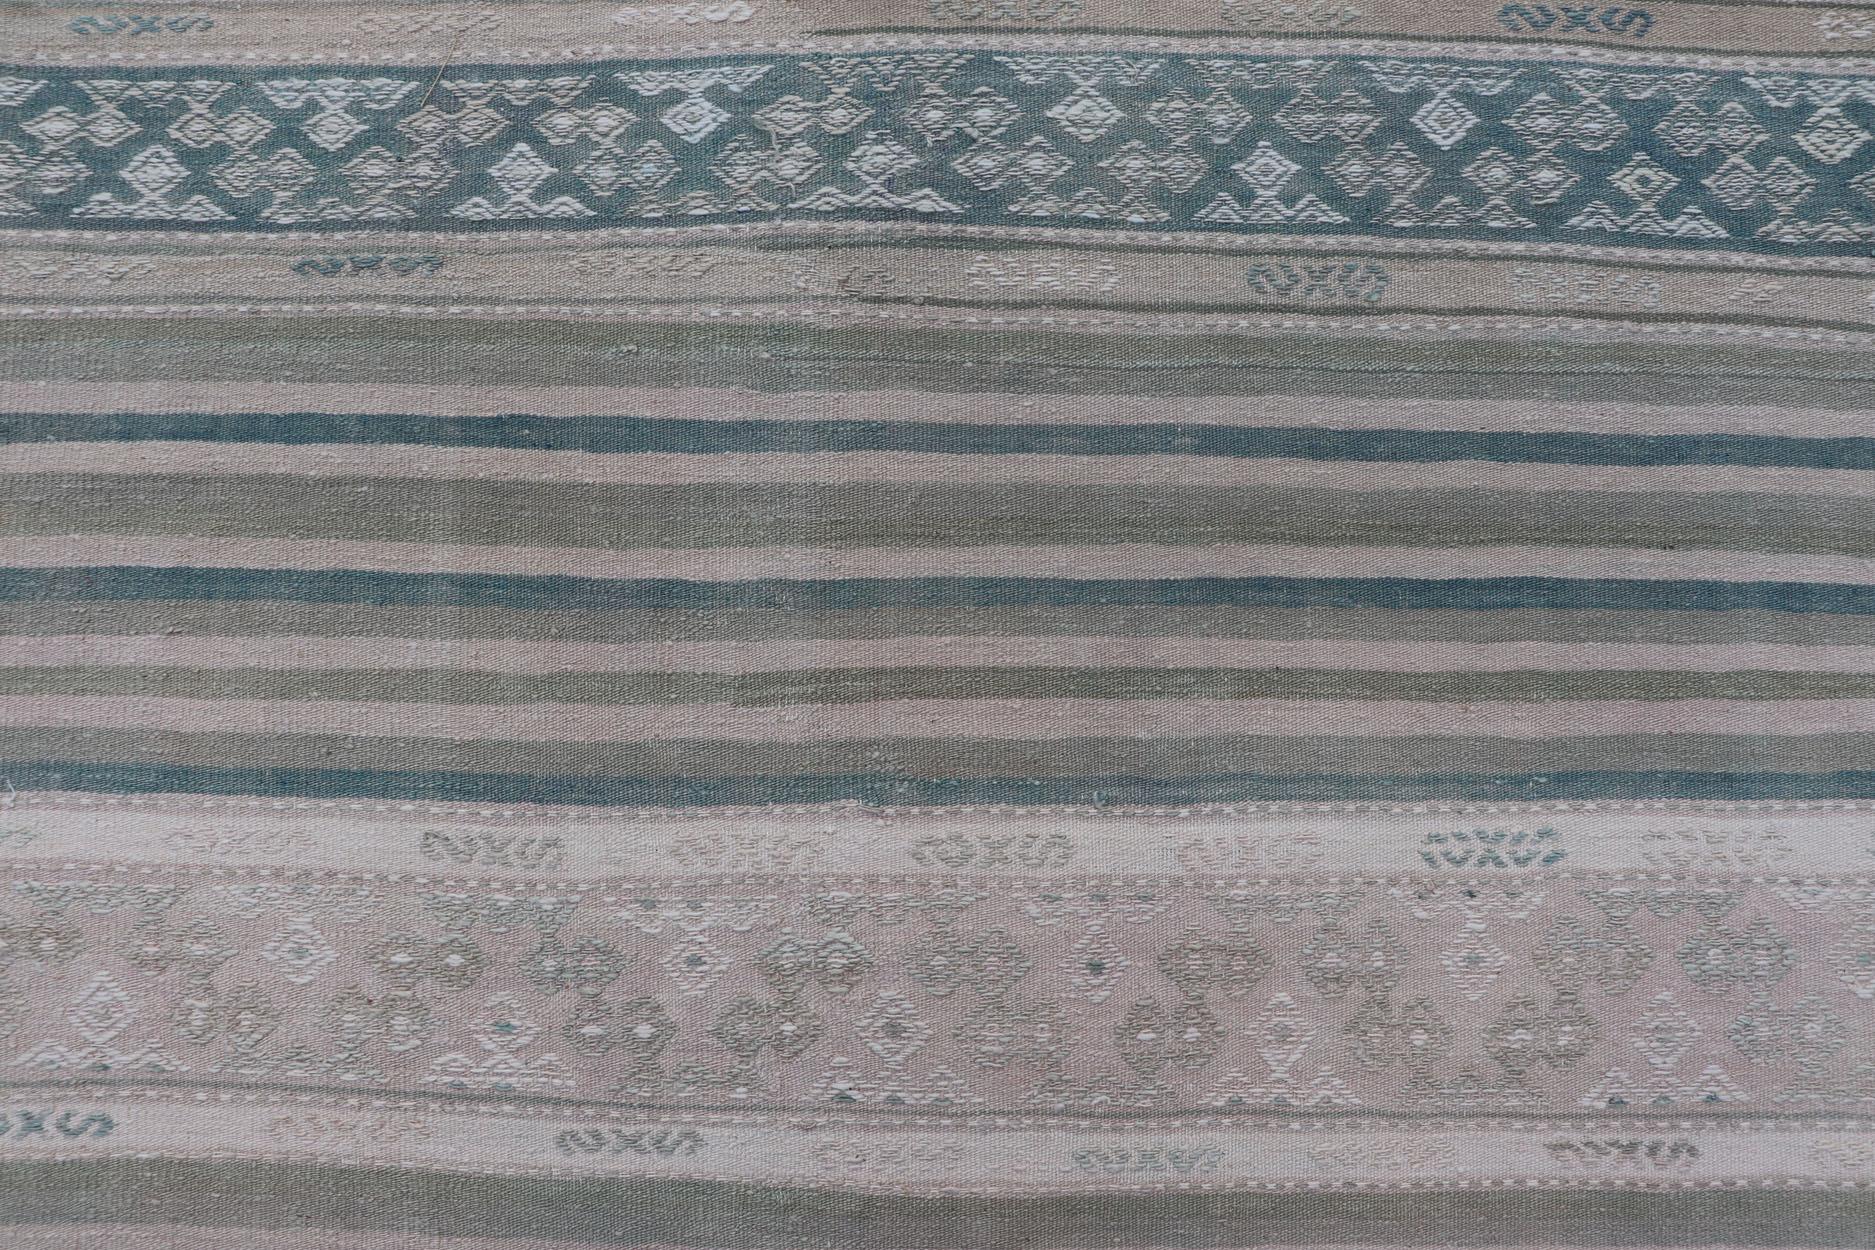 Wool Vintage Flat-Weave Kilim with Embroideries in Blush, Green, Blue and Gray For Sale